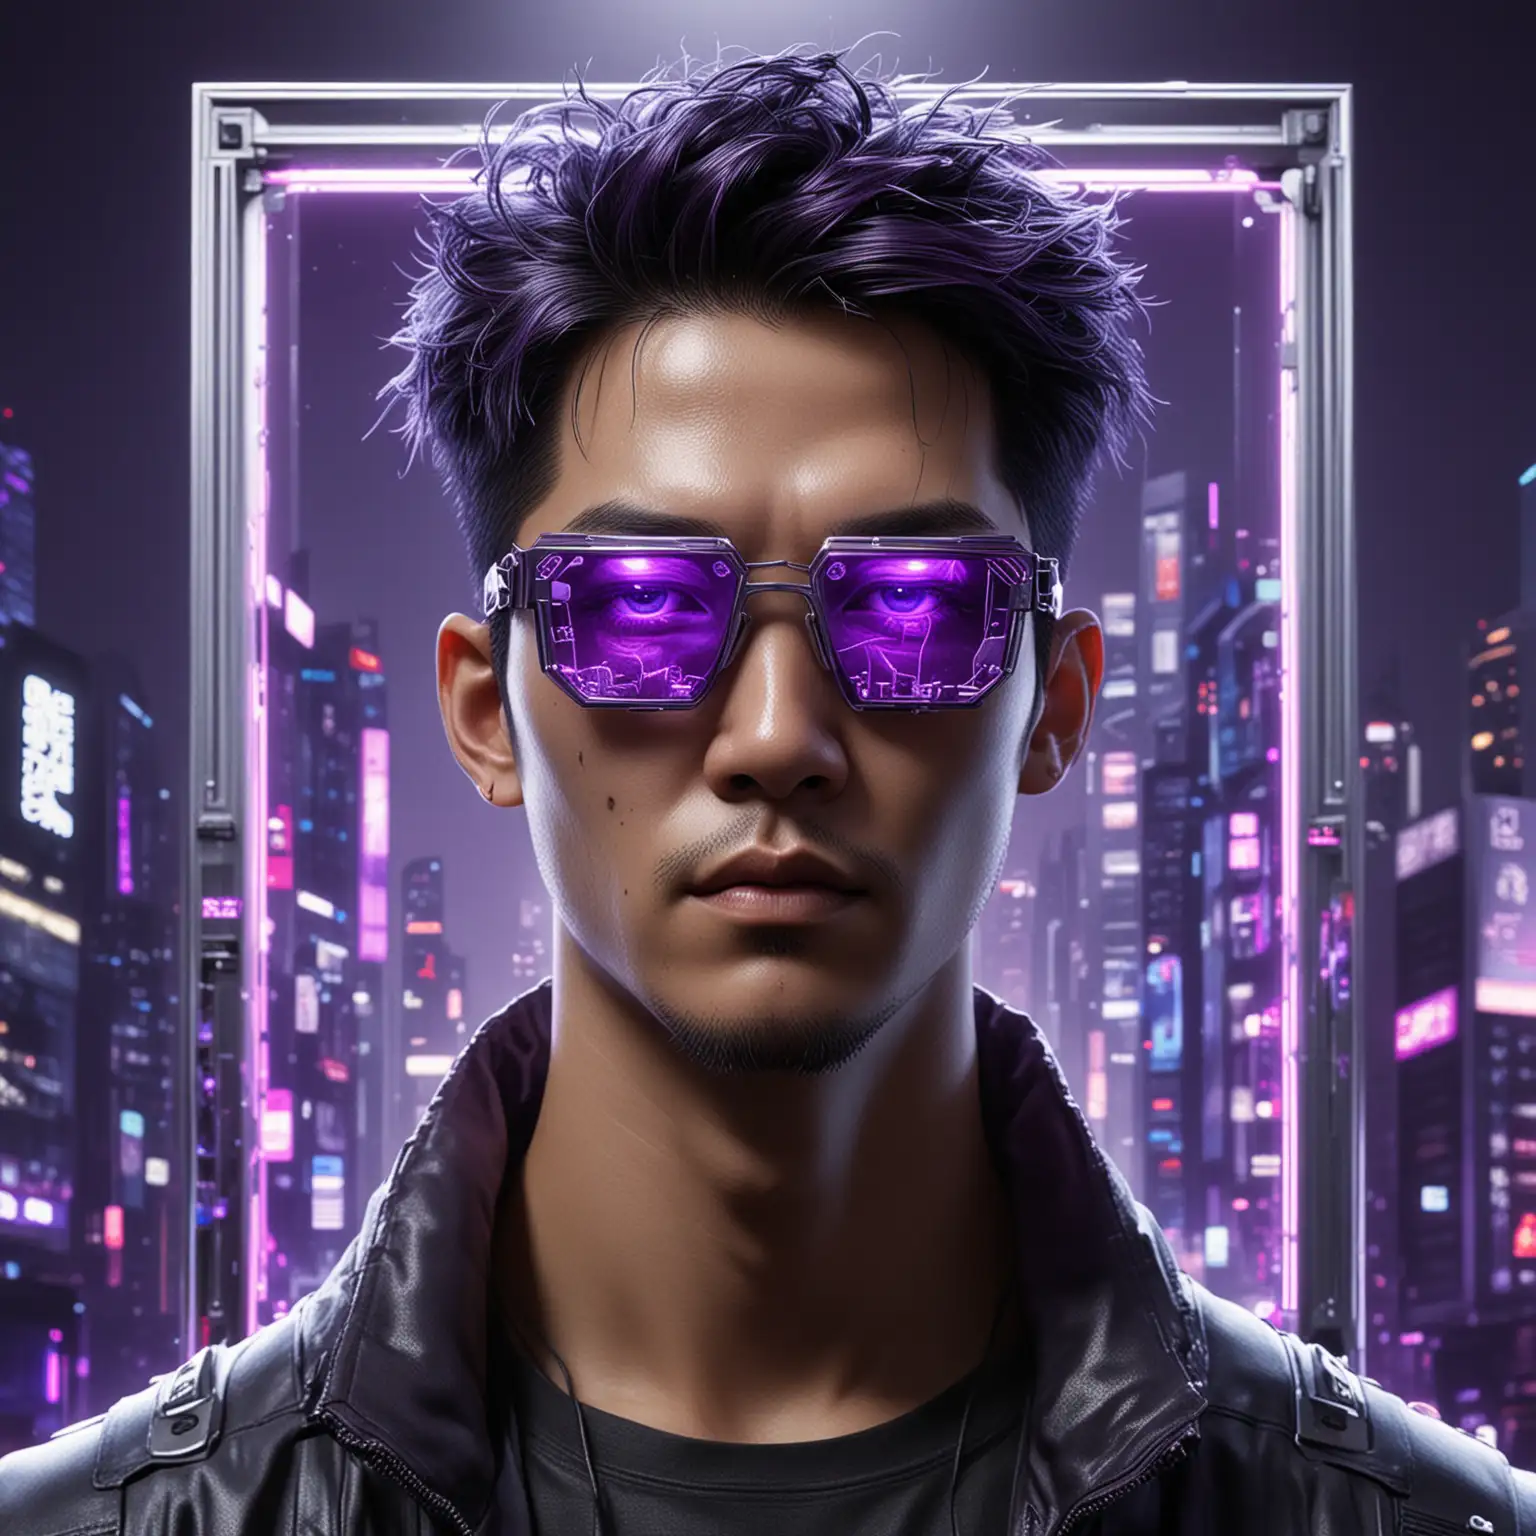 Hong Kong Man in Cyberpunk Attire with Purple Aesthetic and Silver Glasses